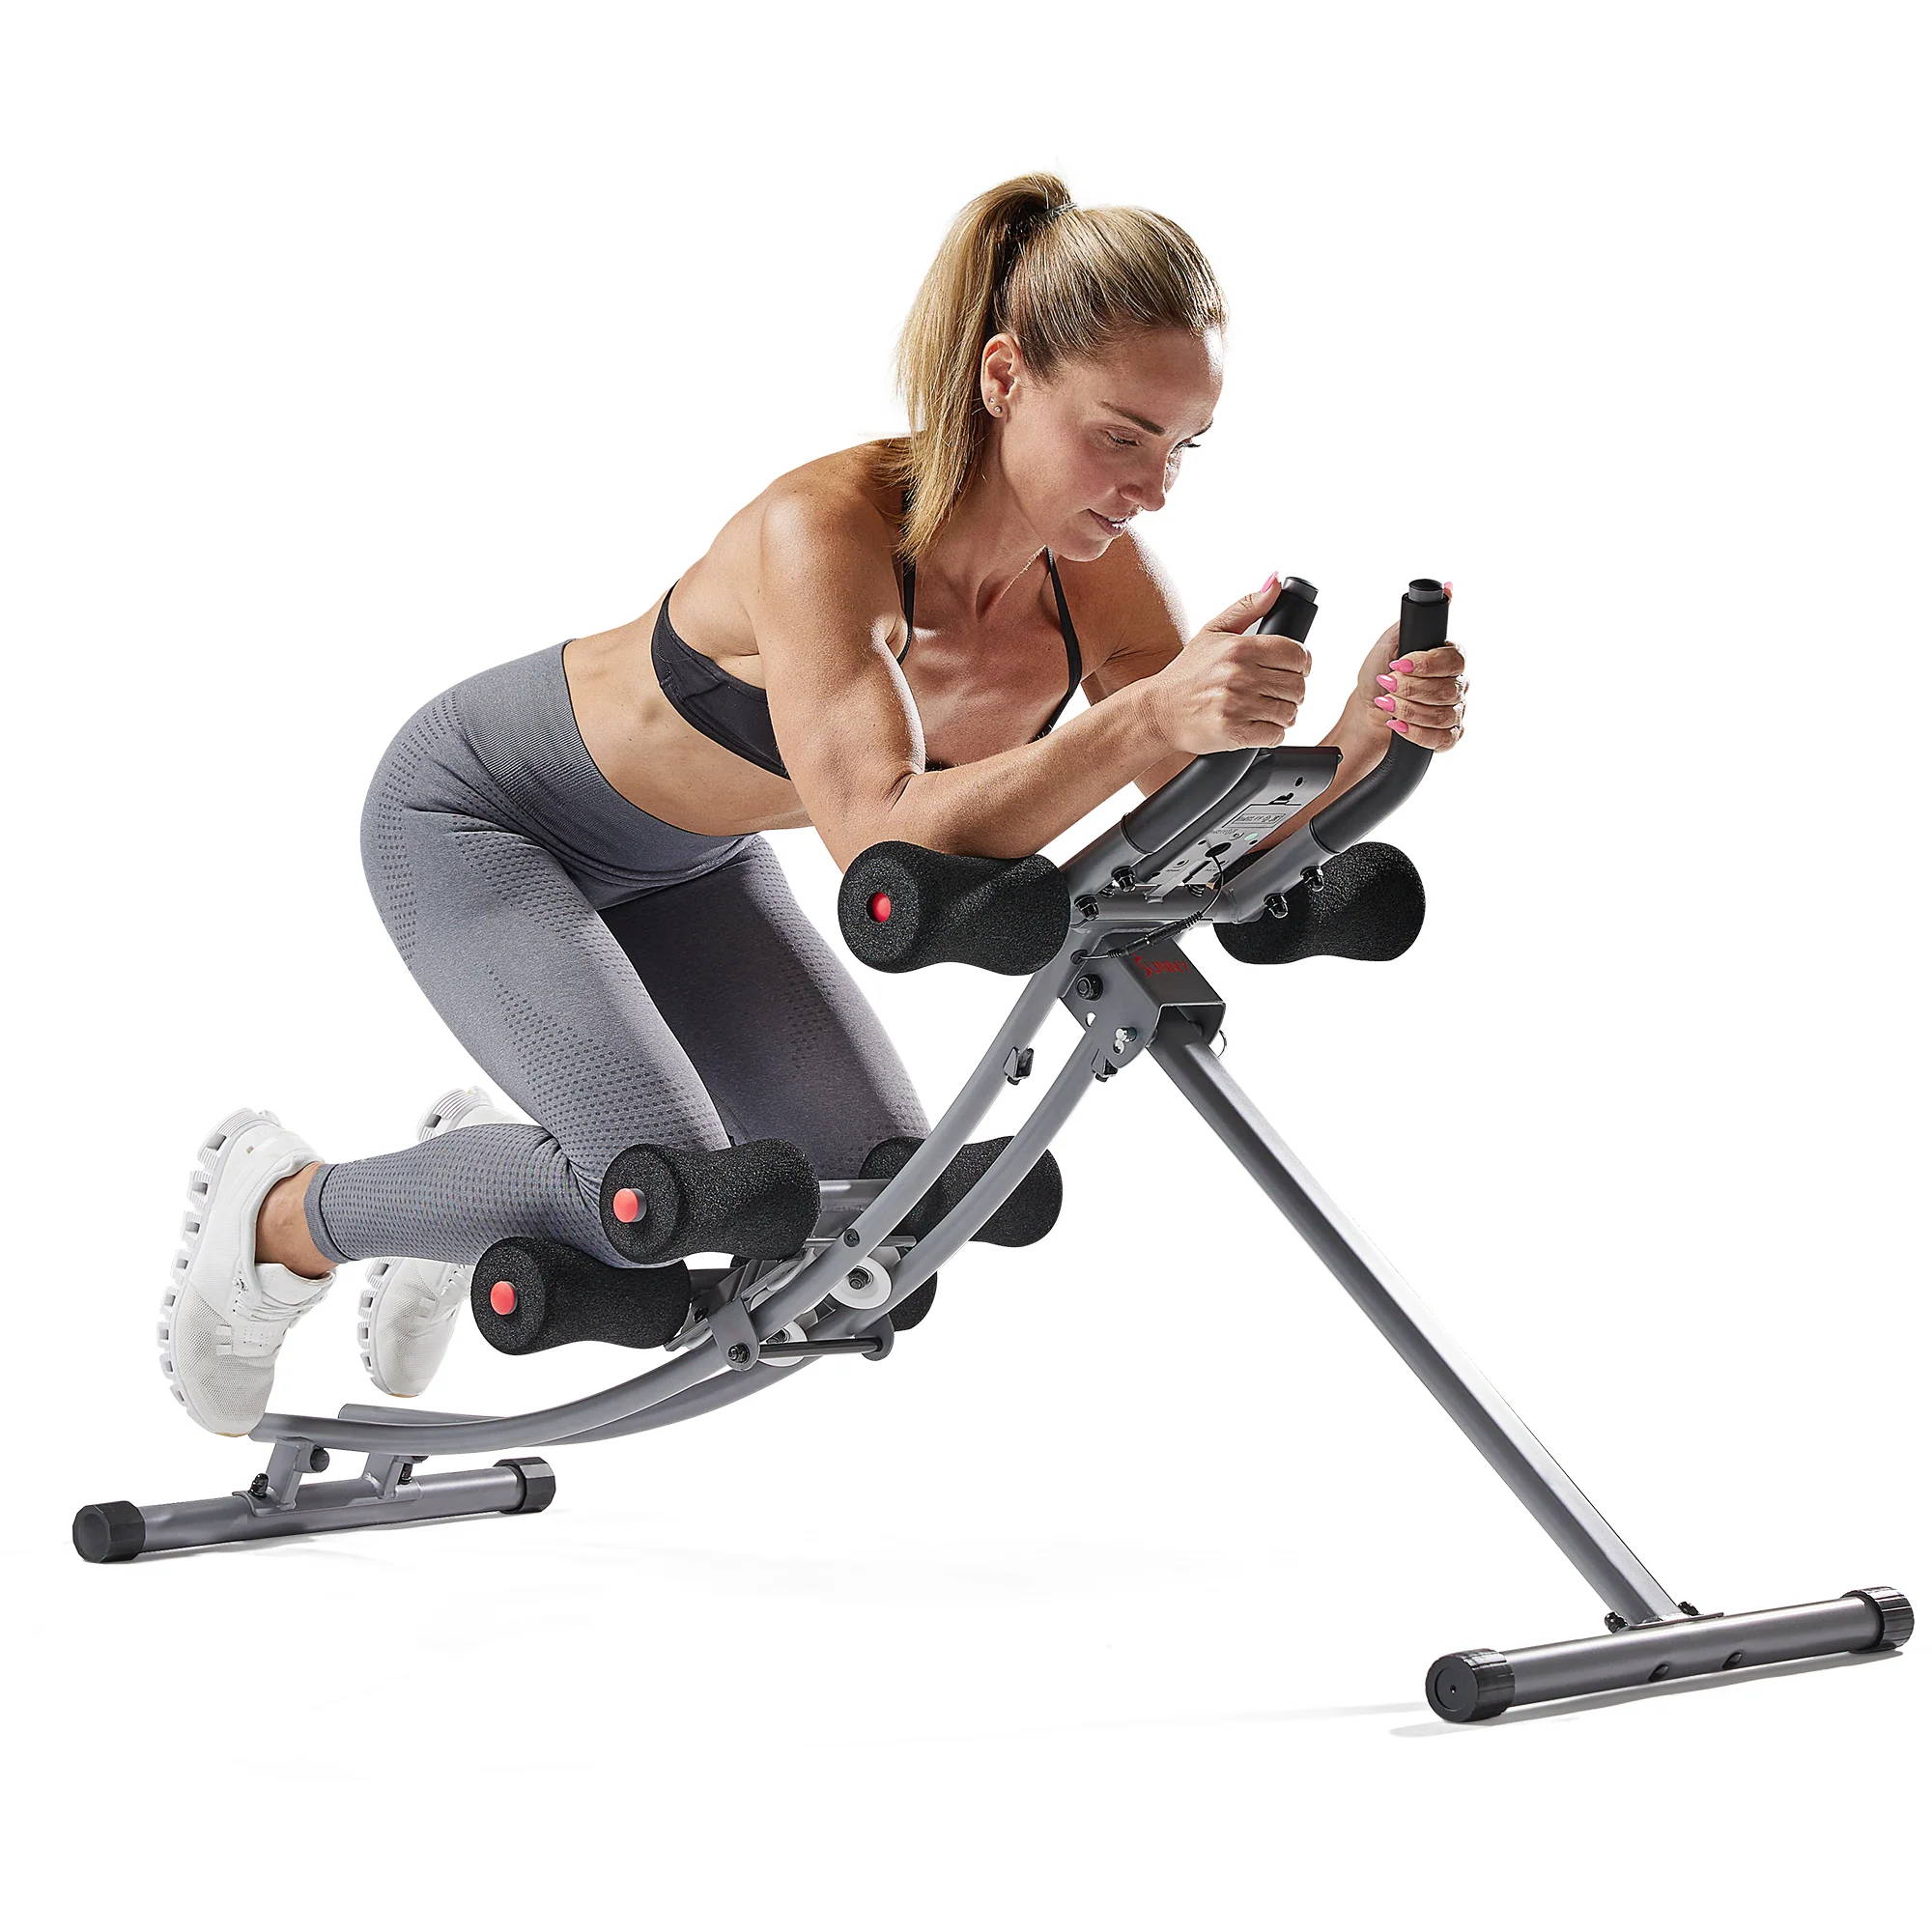 FLYBIRD Ab Workout Equipment, Adjustable Ab Machine Full Body